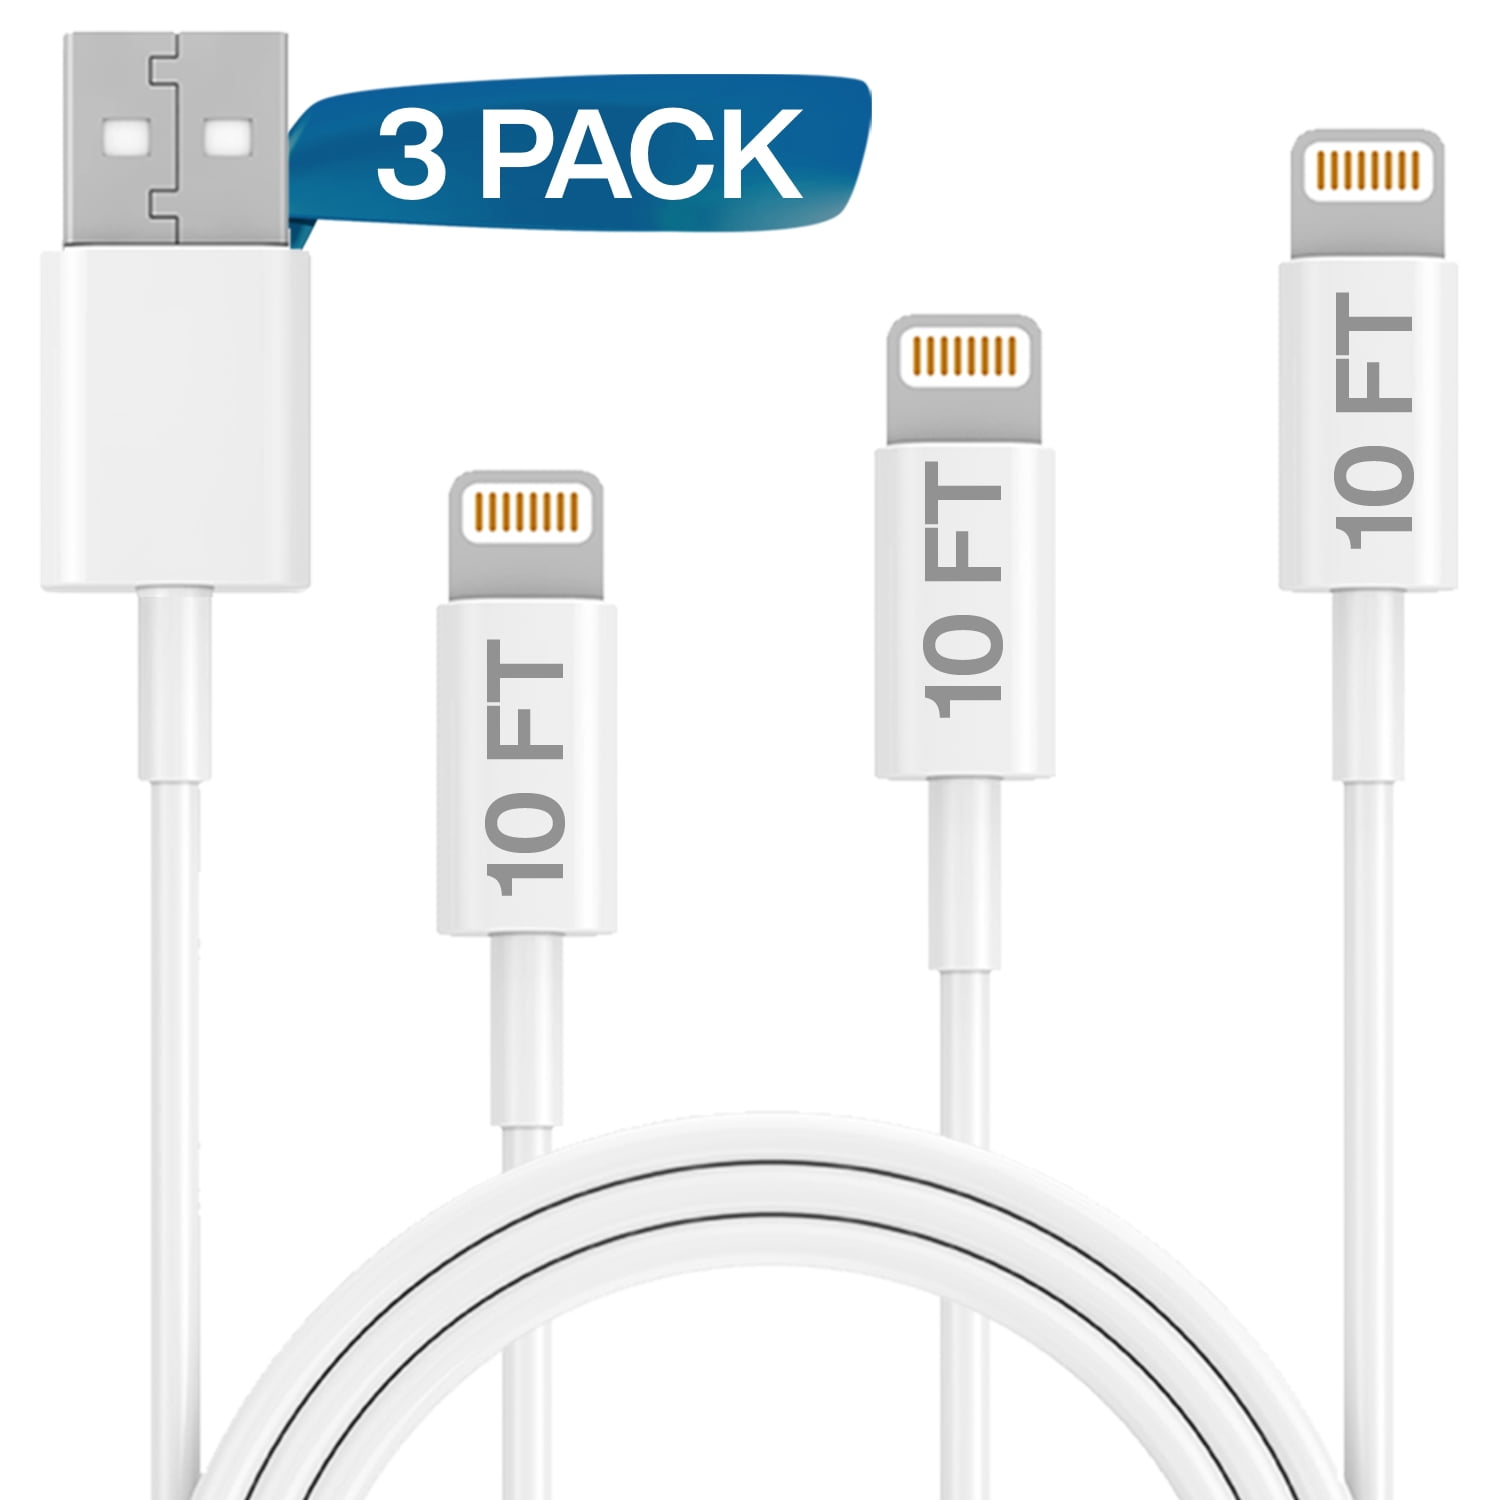 Make a snowman Say aside Porter Ixir Charger Lightning Cable, 3 Pack 10FT USB Cable, Compatible with iPhone  13, 12, 11, Xs, Xs Max, XR, X, 8, 8 Plus, 7, 7 Plus, 6S, 6S Plus,iPad Air,  Mini, iPod